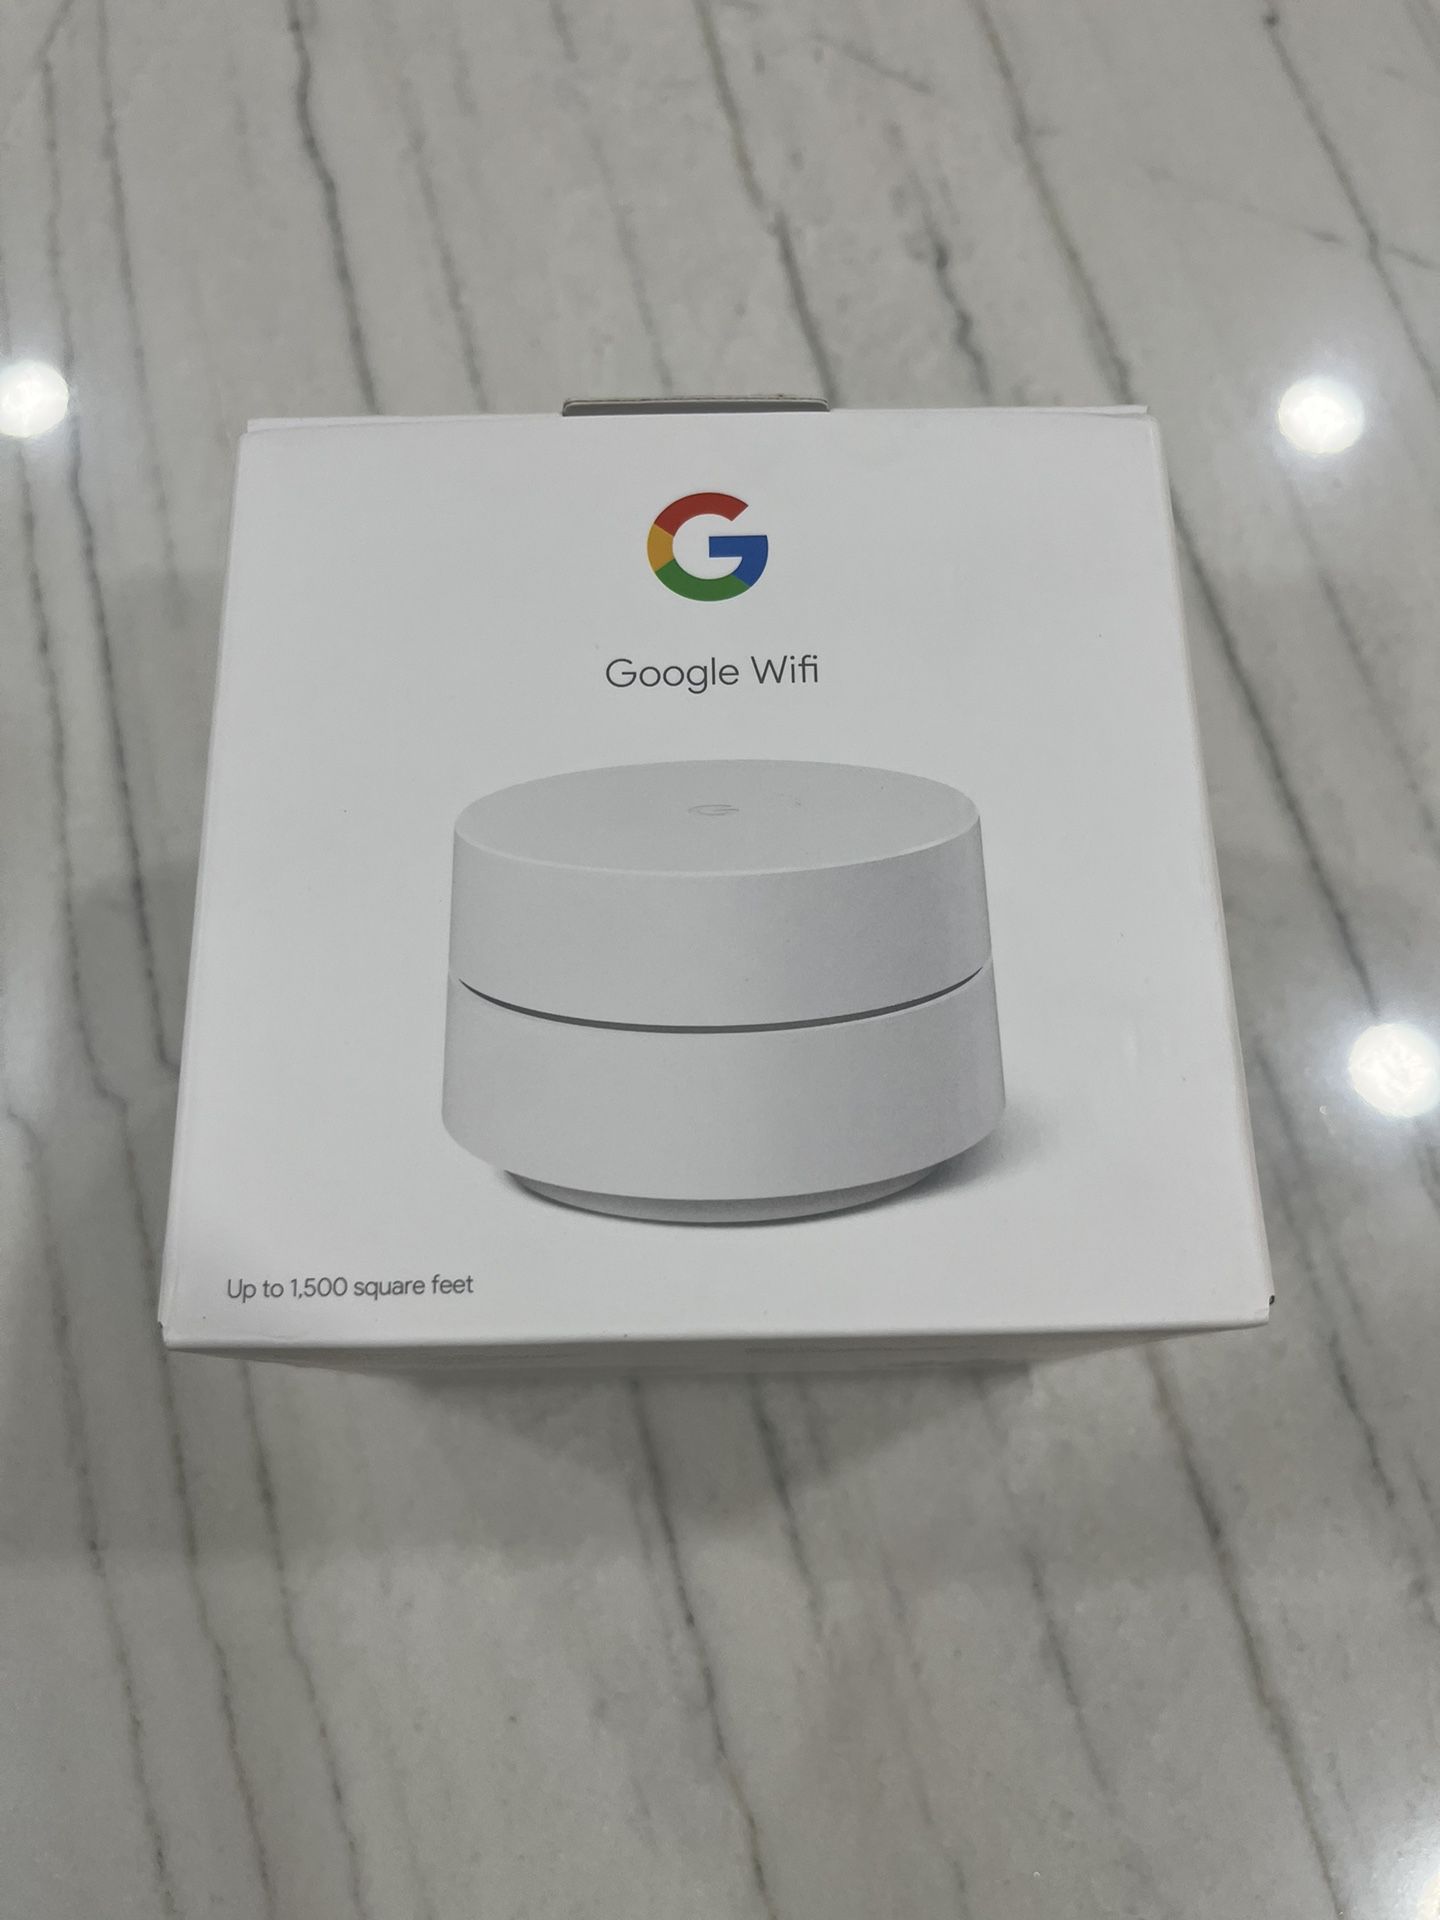 Google Wifi - AC1200 - Mesh WiFi System - Wifi Router - 1500 Sq Ft Coverage - 1